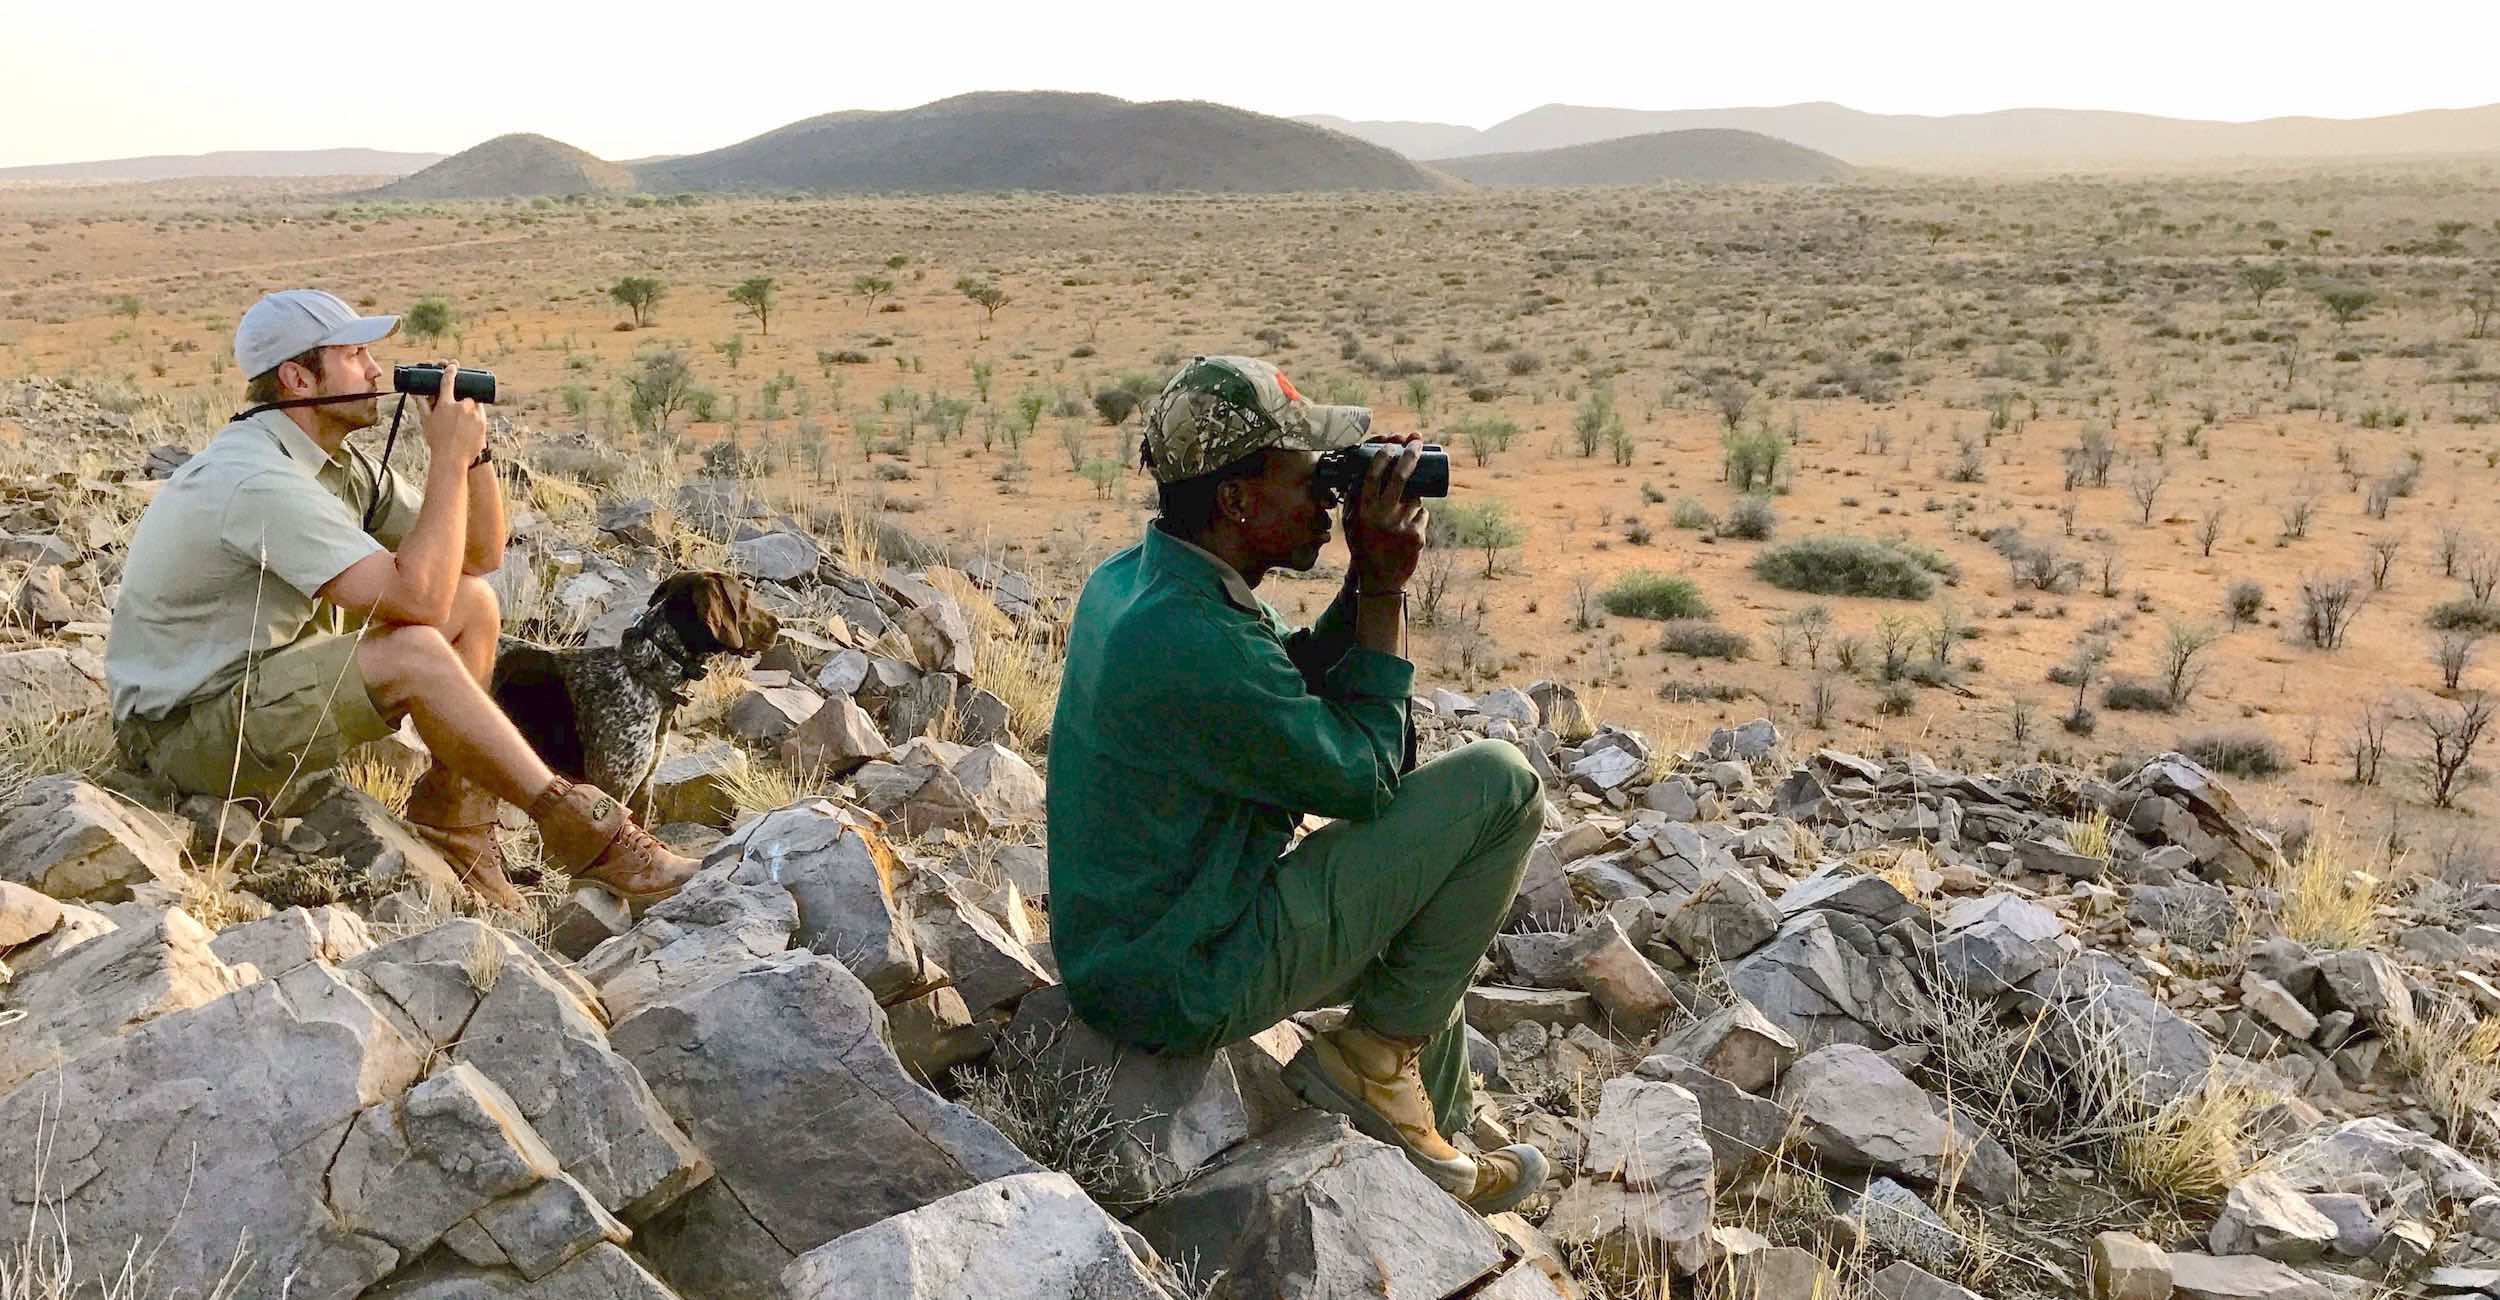 A hunter and his guide look through their binoculars.